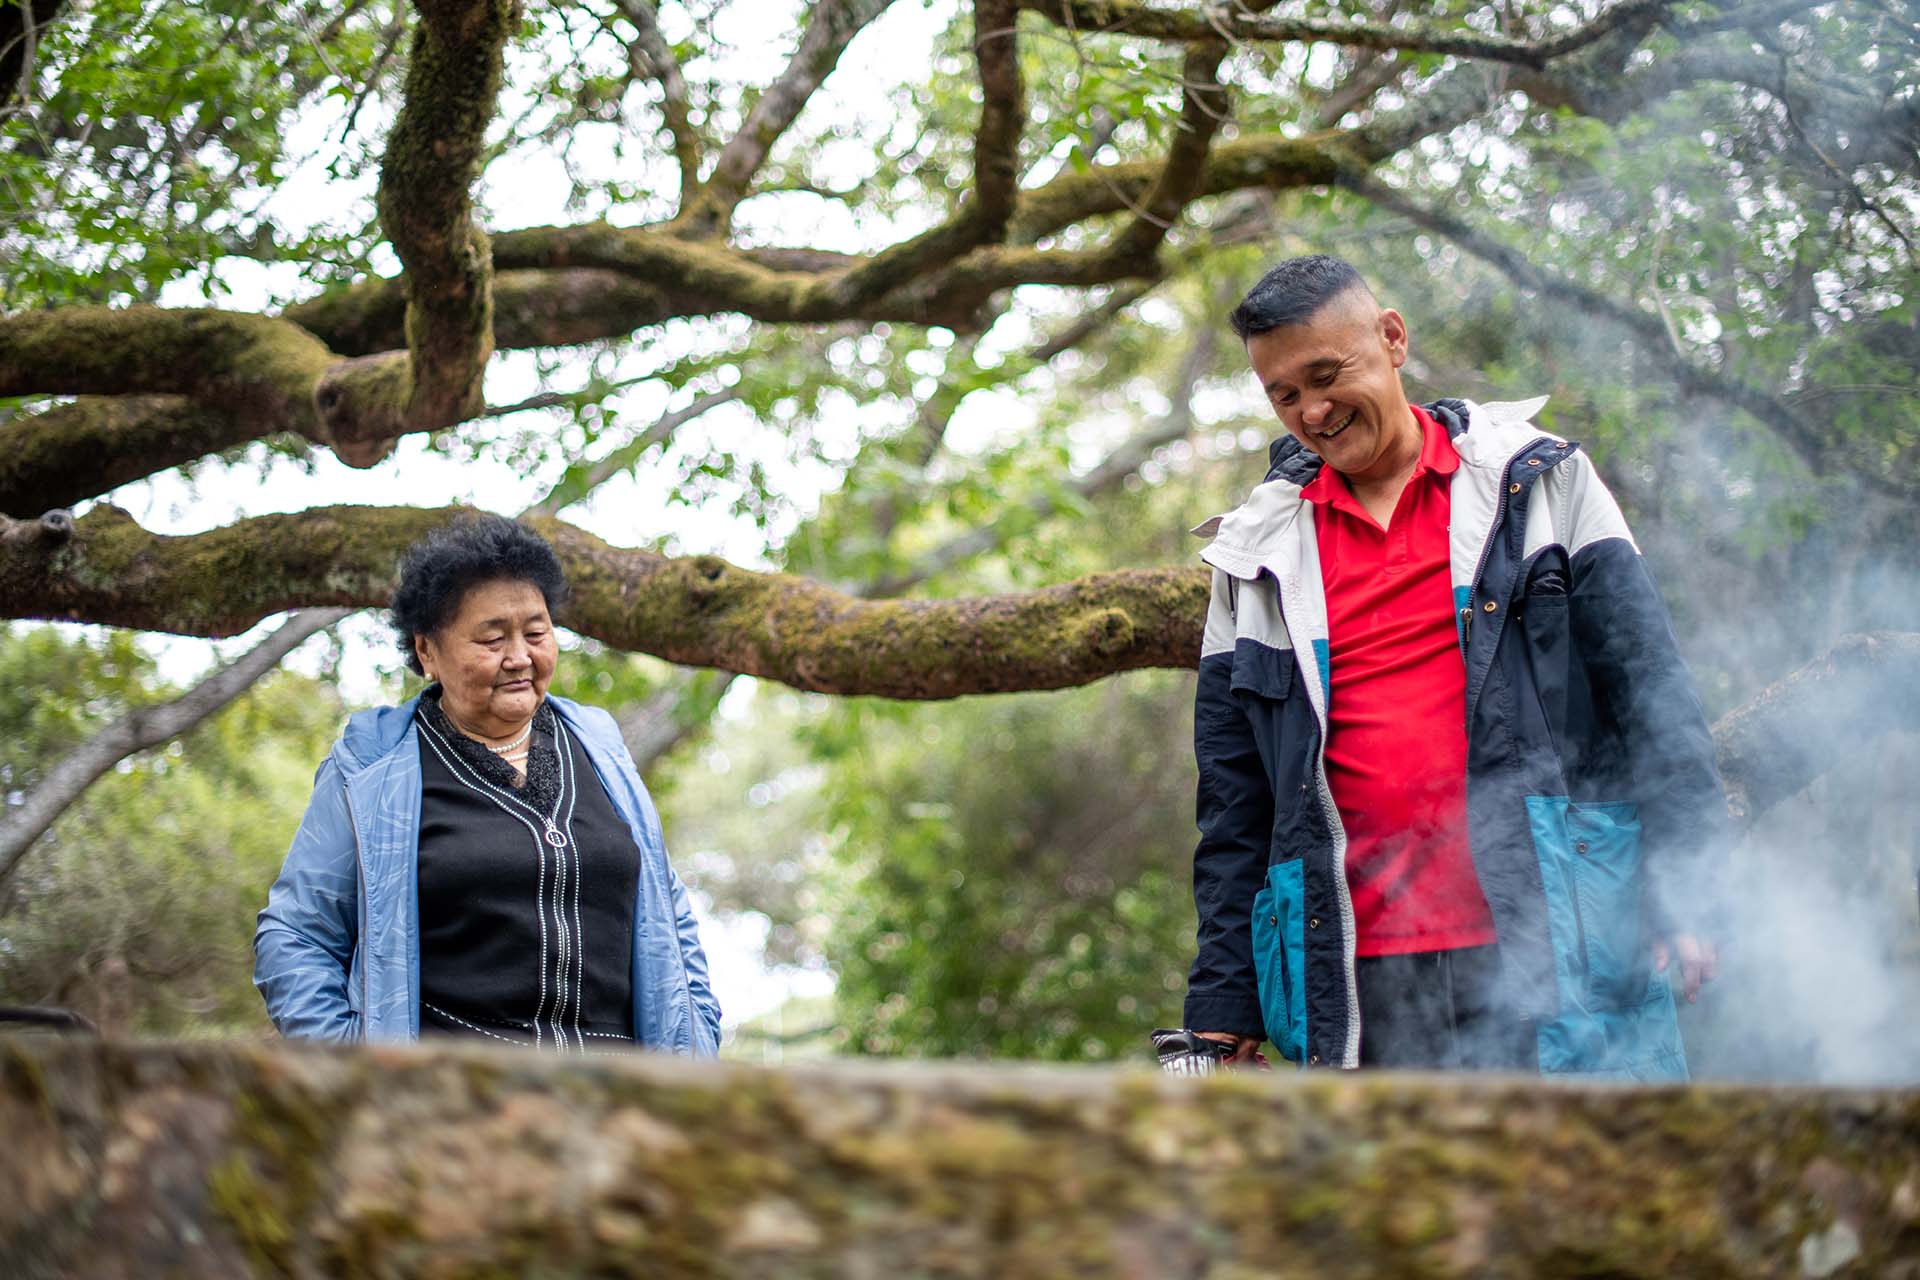 An older woman and a man smile, looking down toward the ground in a wooded area.